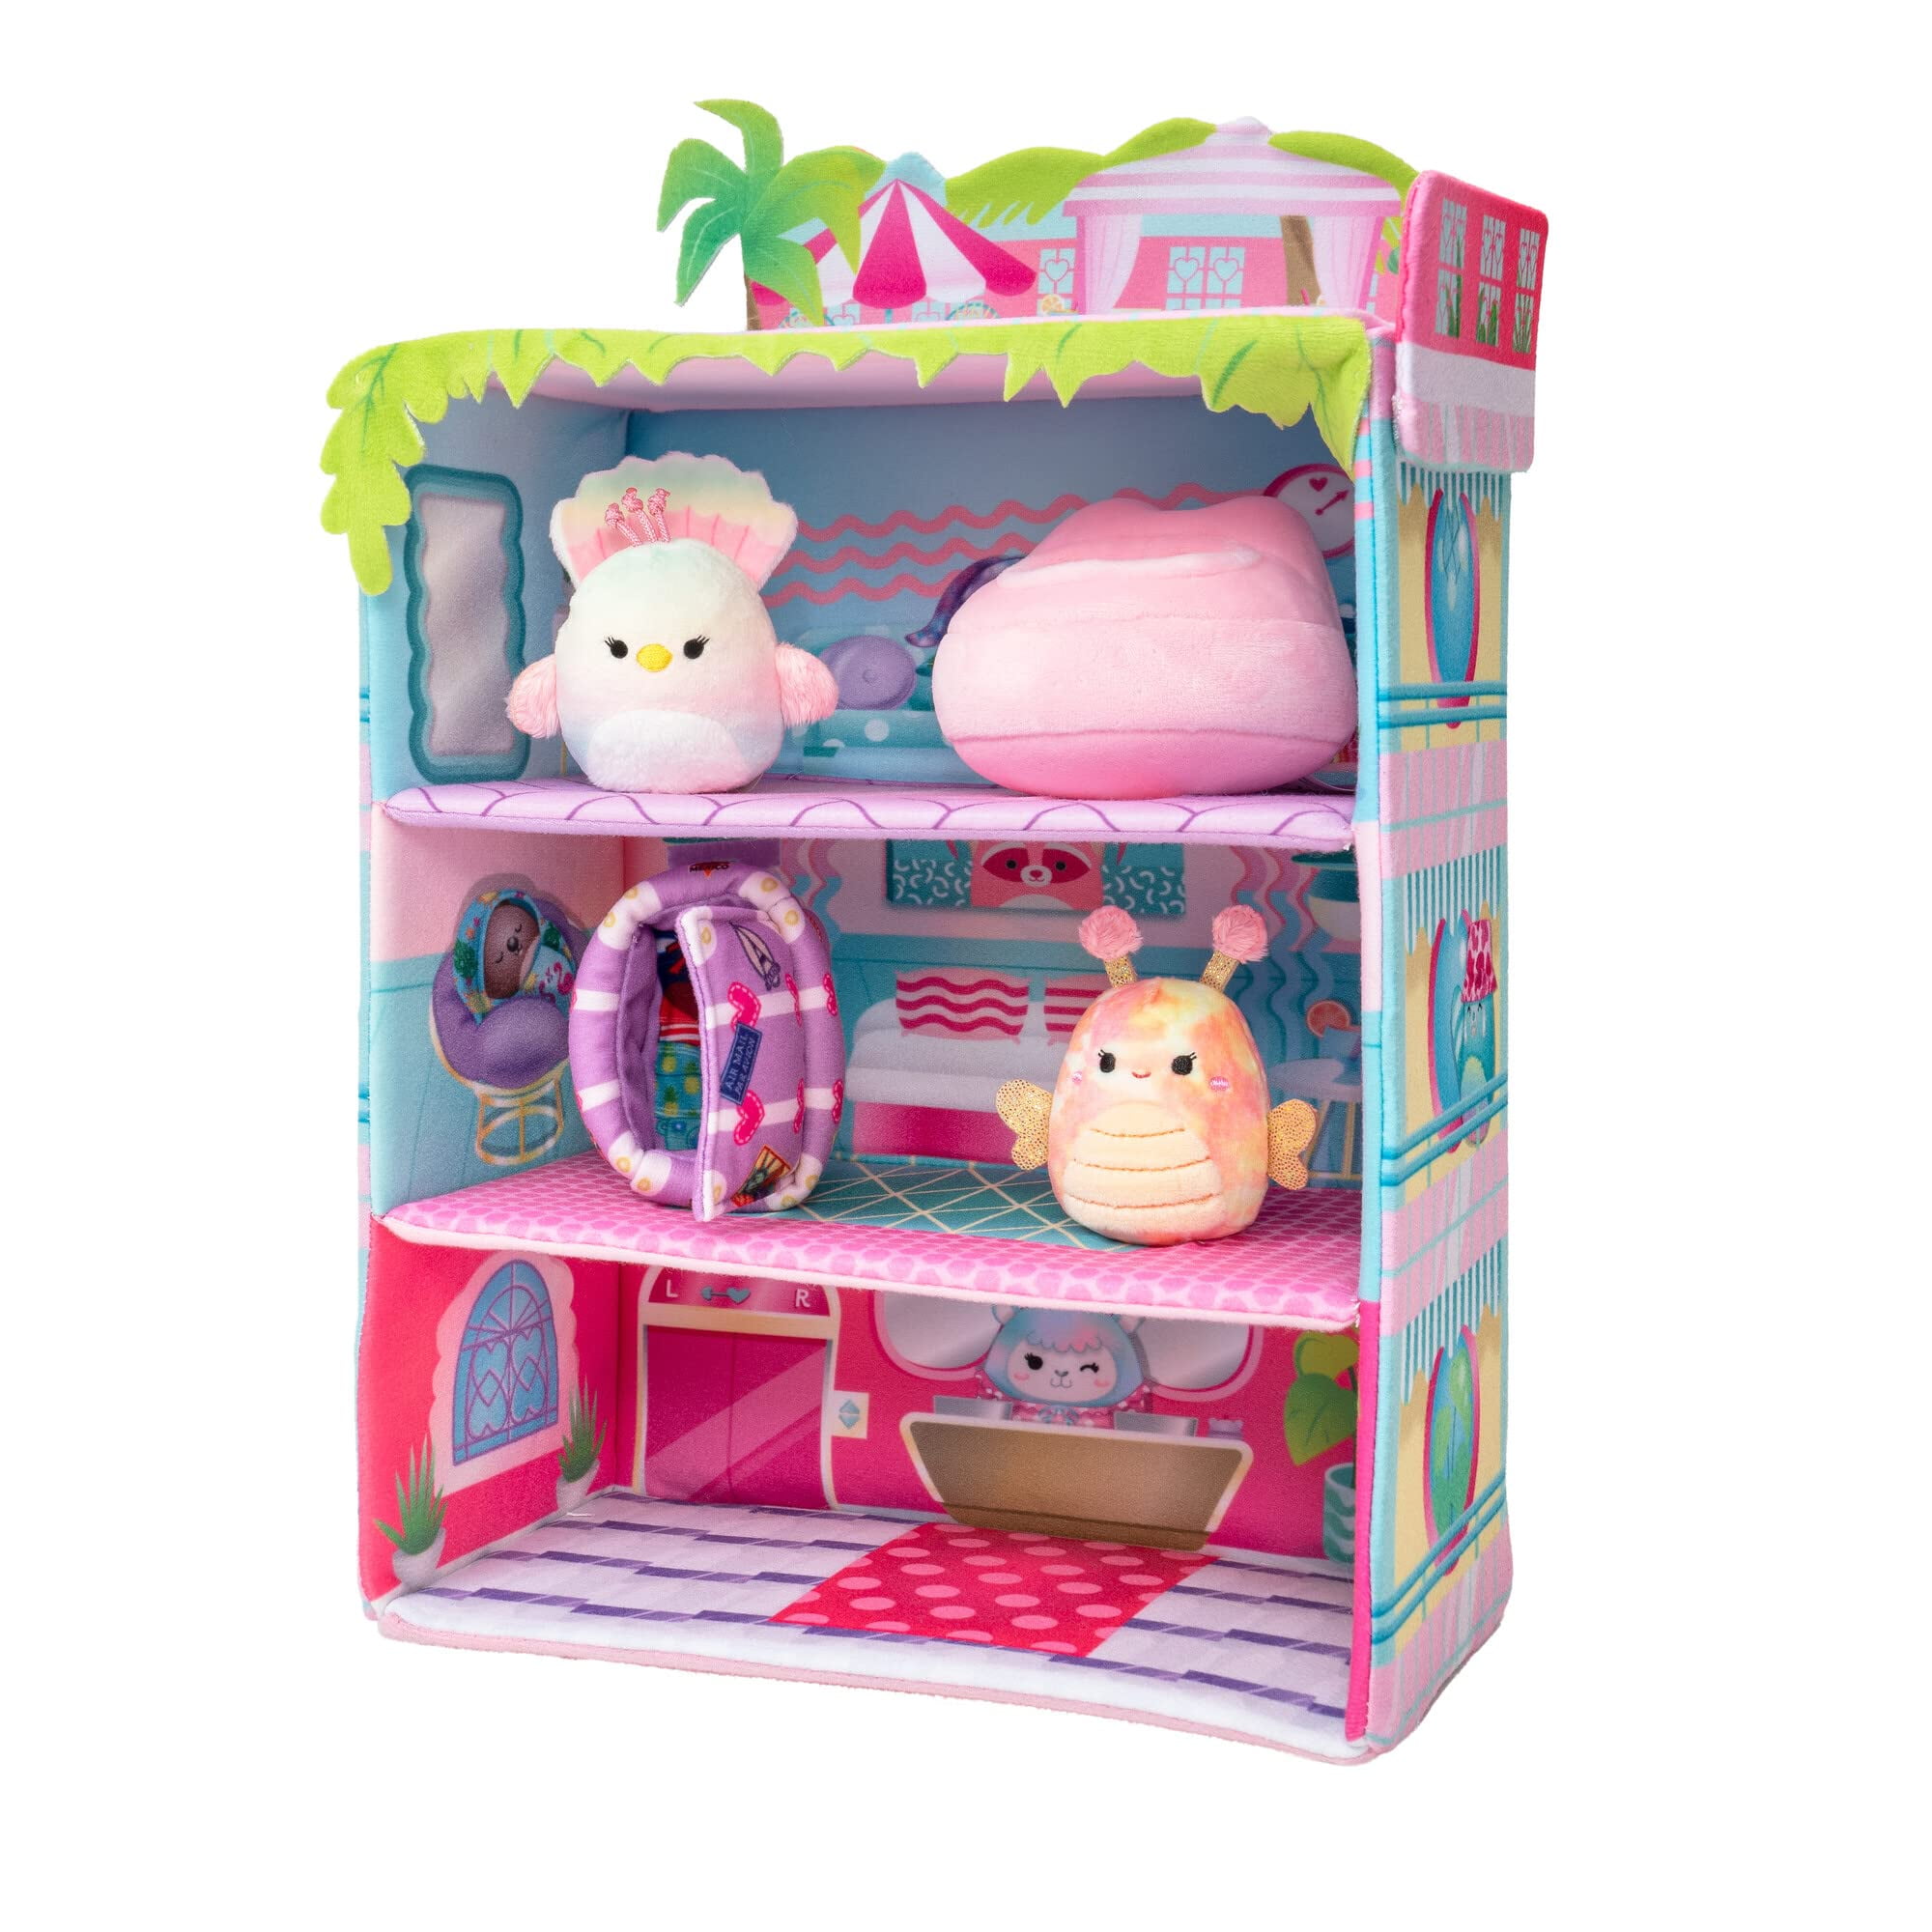 Squishville by Original Squishmallows Blue Seas Inn - Includes Two 2-Inch Squishmallows, Suitcase, Lounger, and Large Playscene -  Exclusive